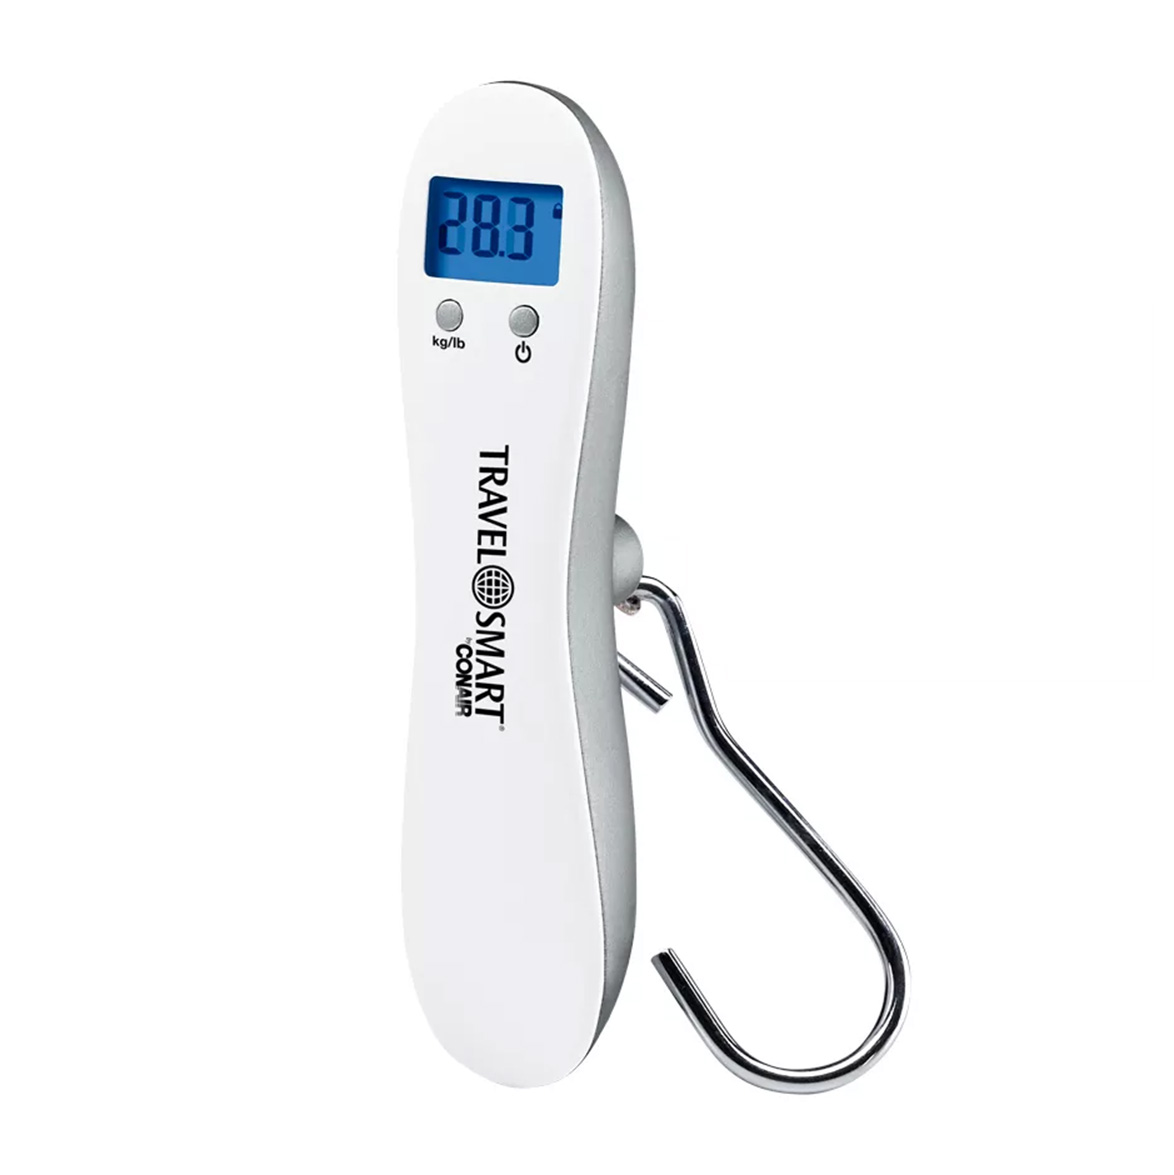 narrow oval shaped digital luggage scale with hook and screen